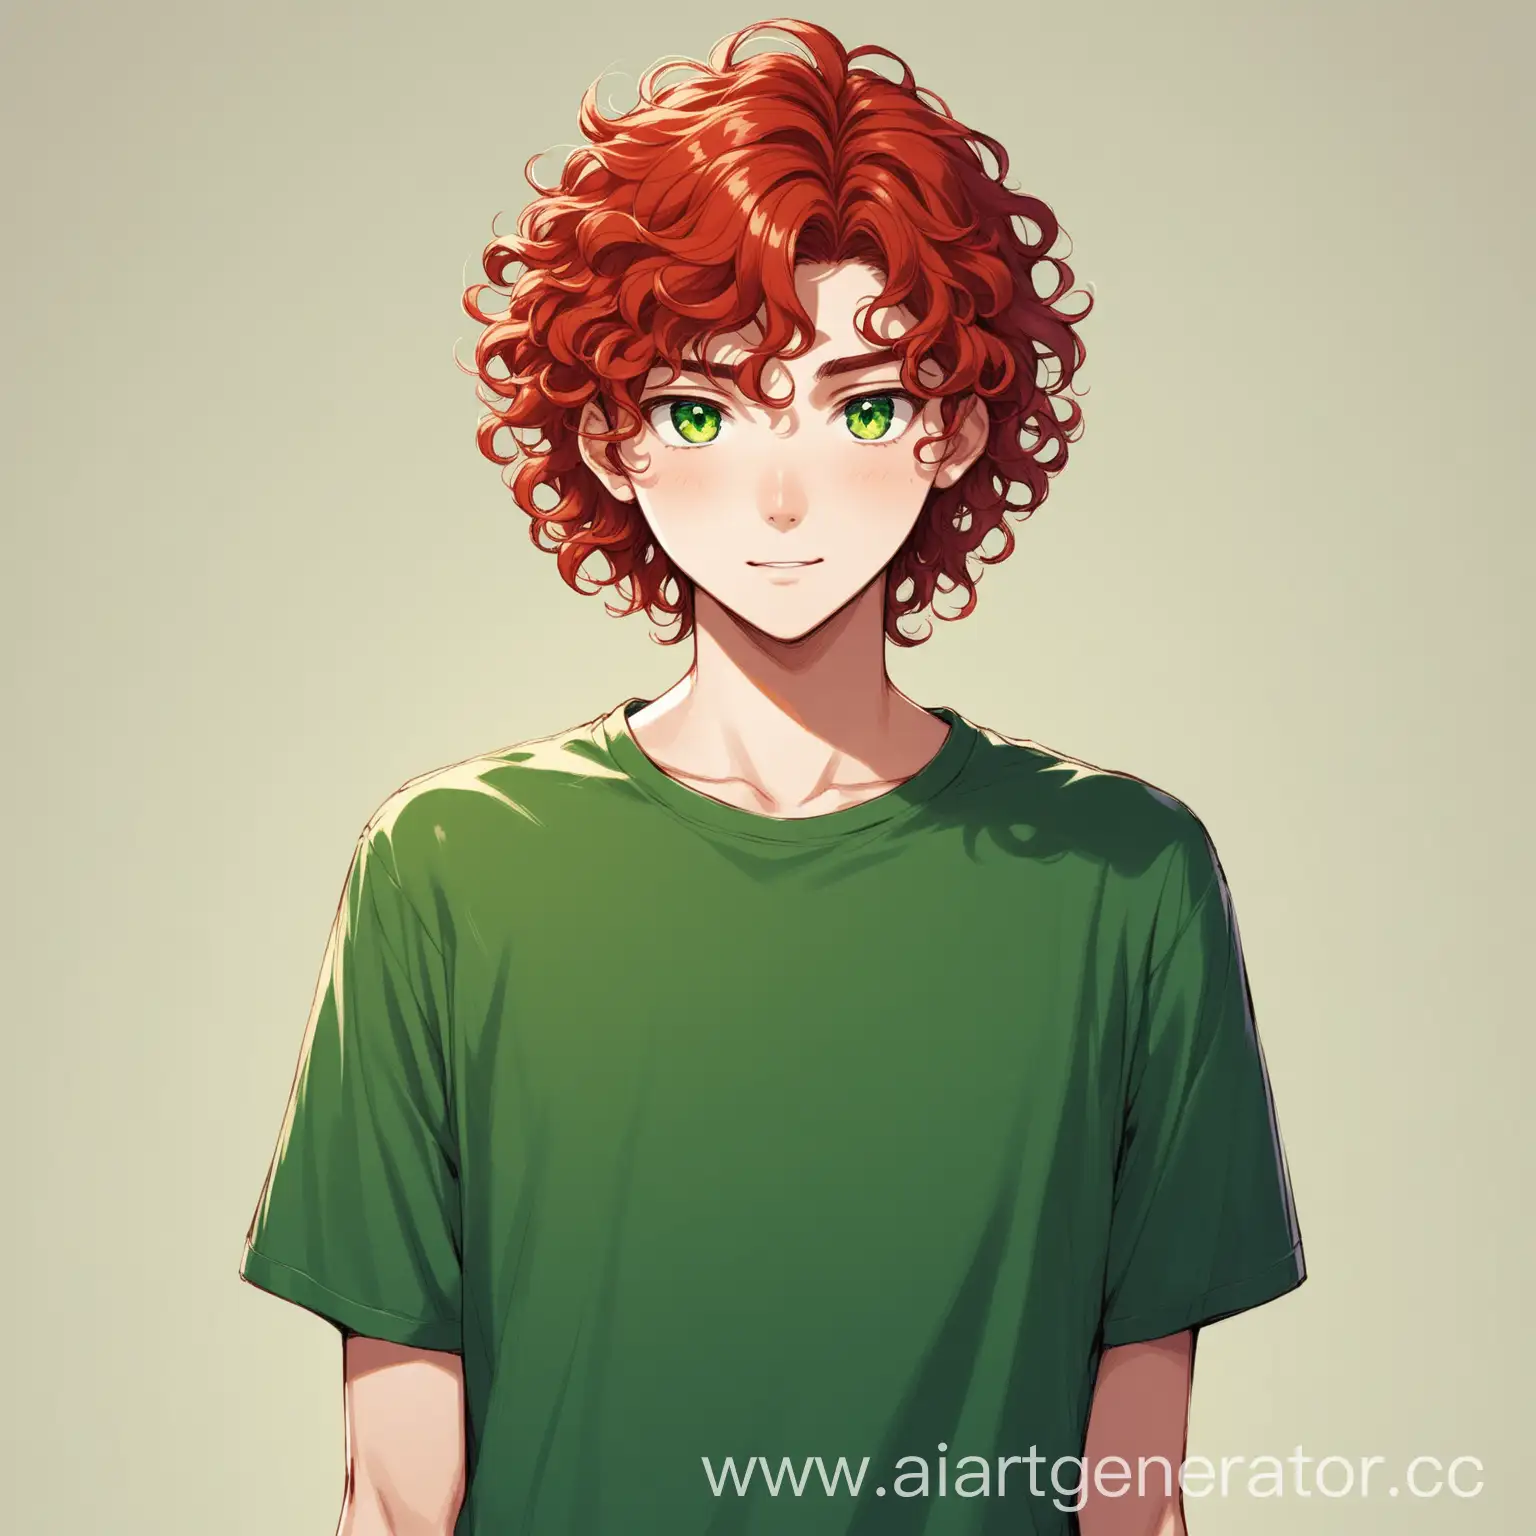 Portrait-of-a-Tall-Teenager-with-Red-Curly-Hair-and-Green-Eyes